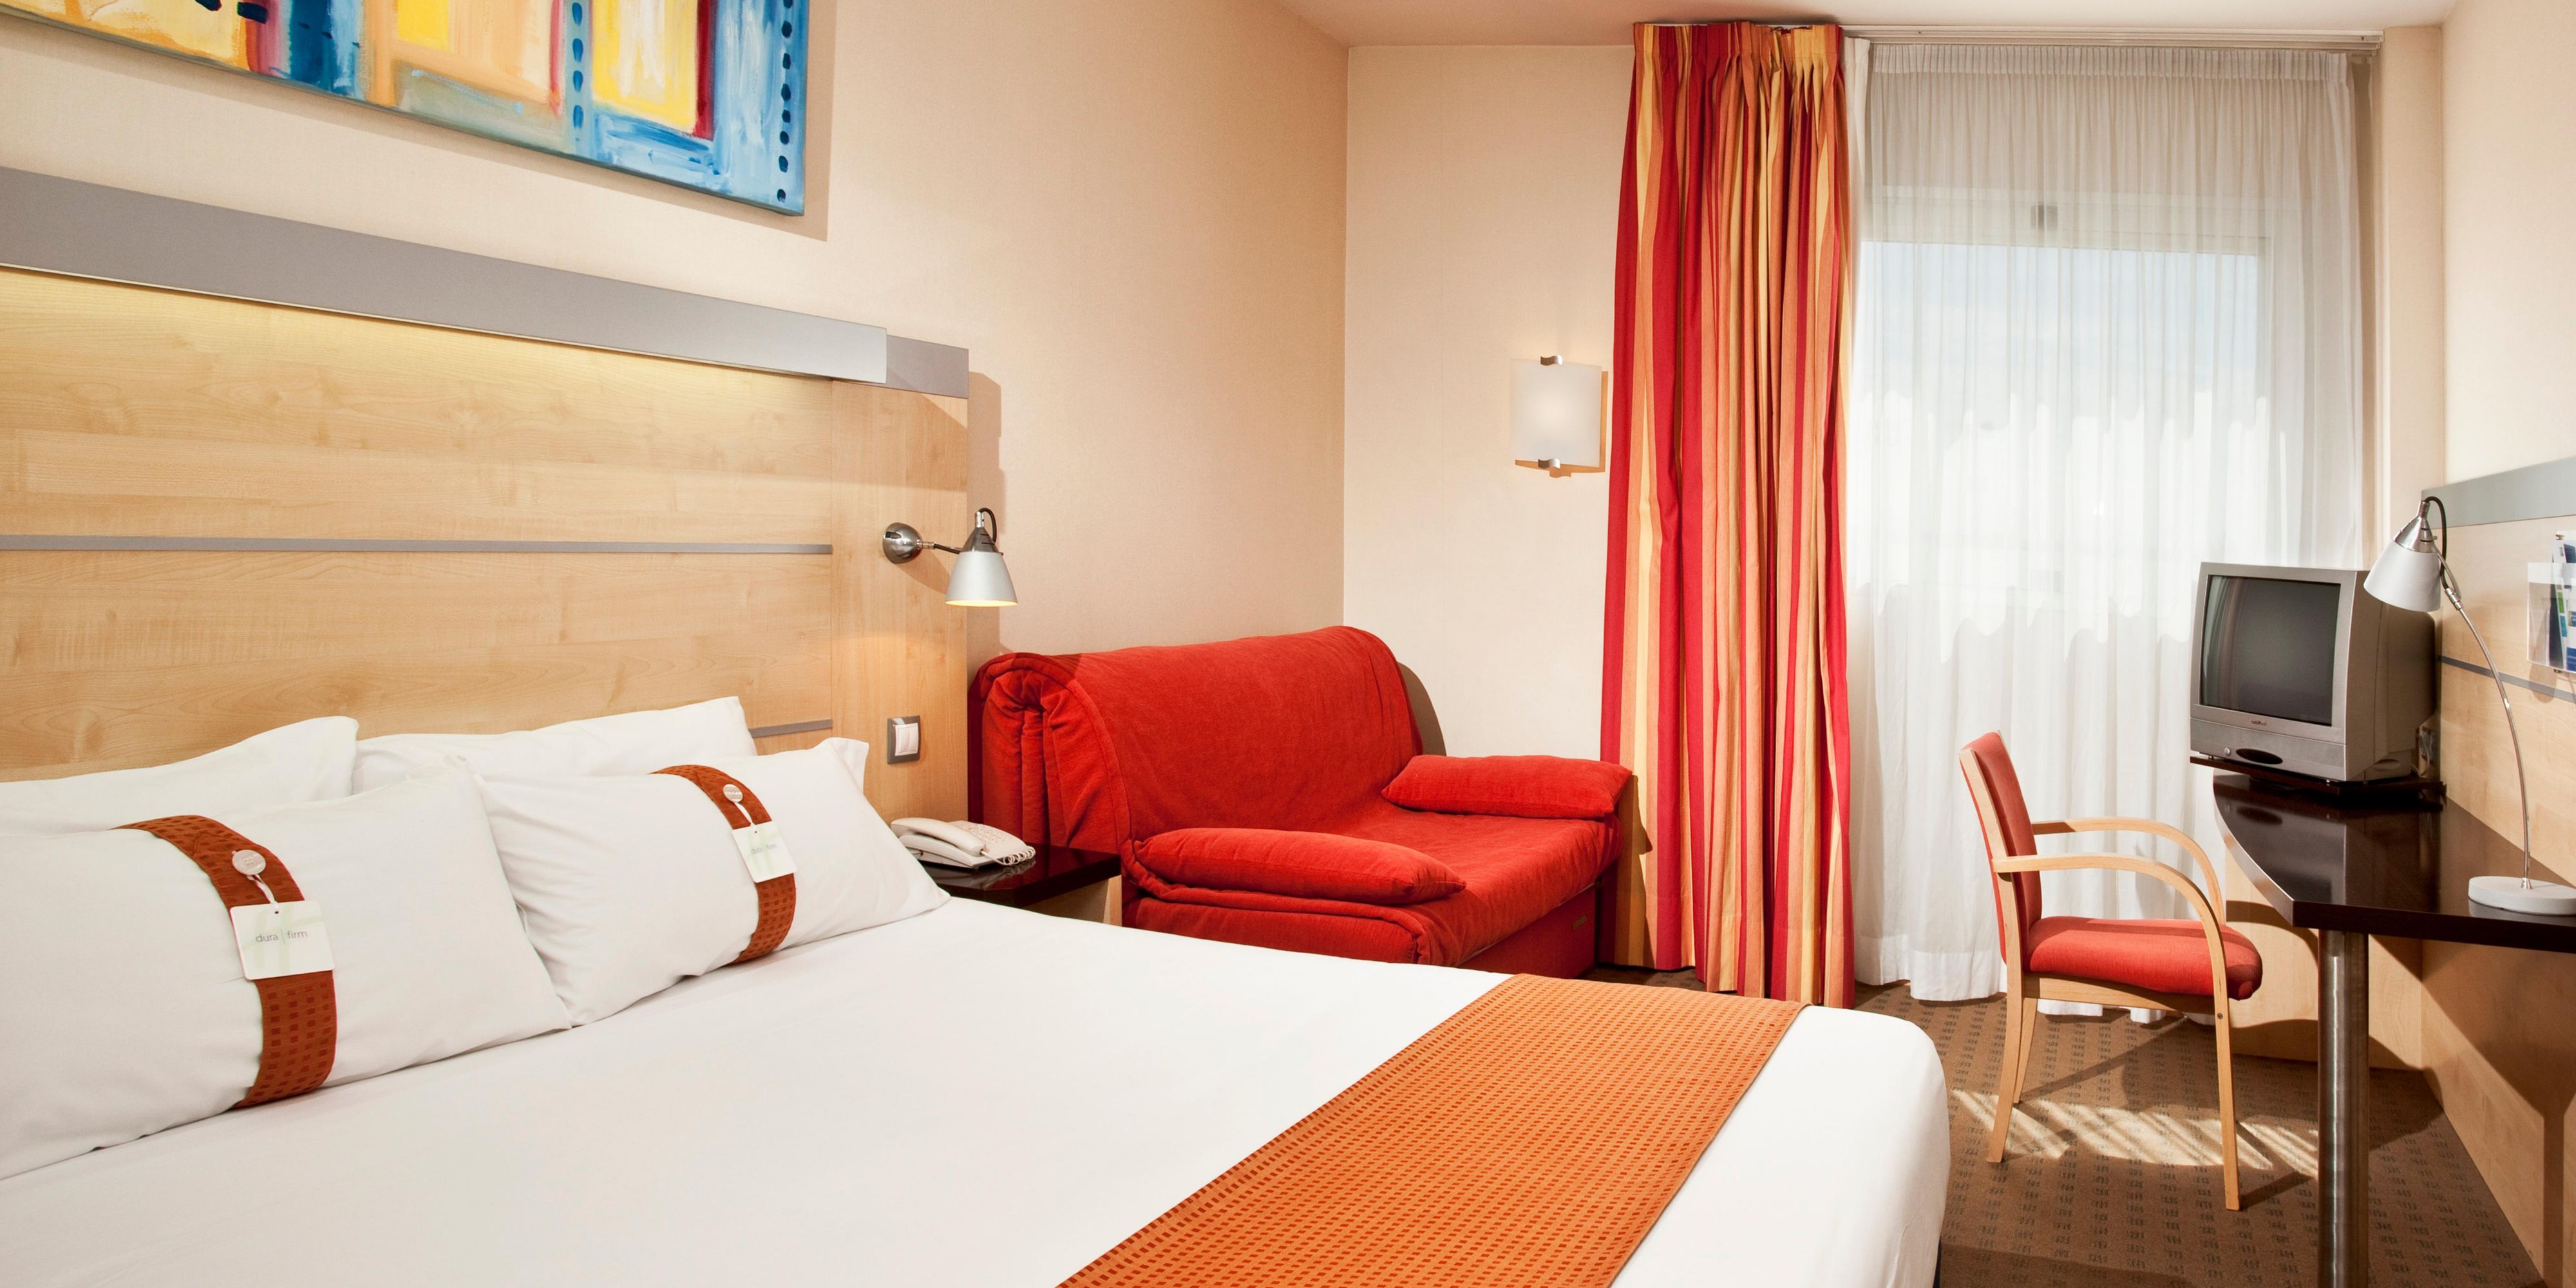 Discount [70% Off] Hotel Holiday Inn Express Madrid Rivas Spain | Hotel Near Me Allow Dogs